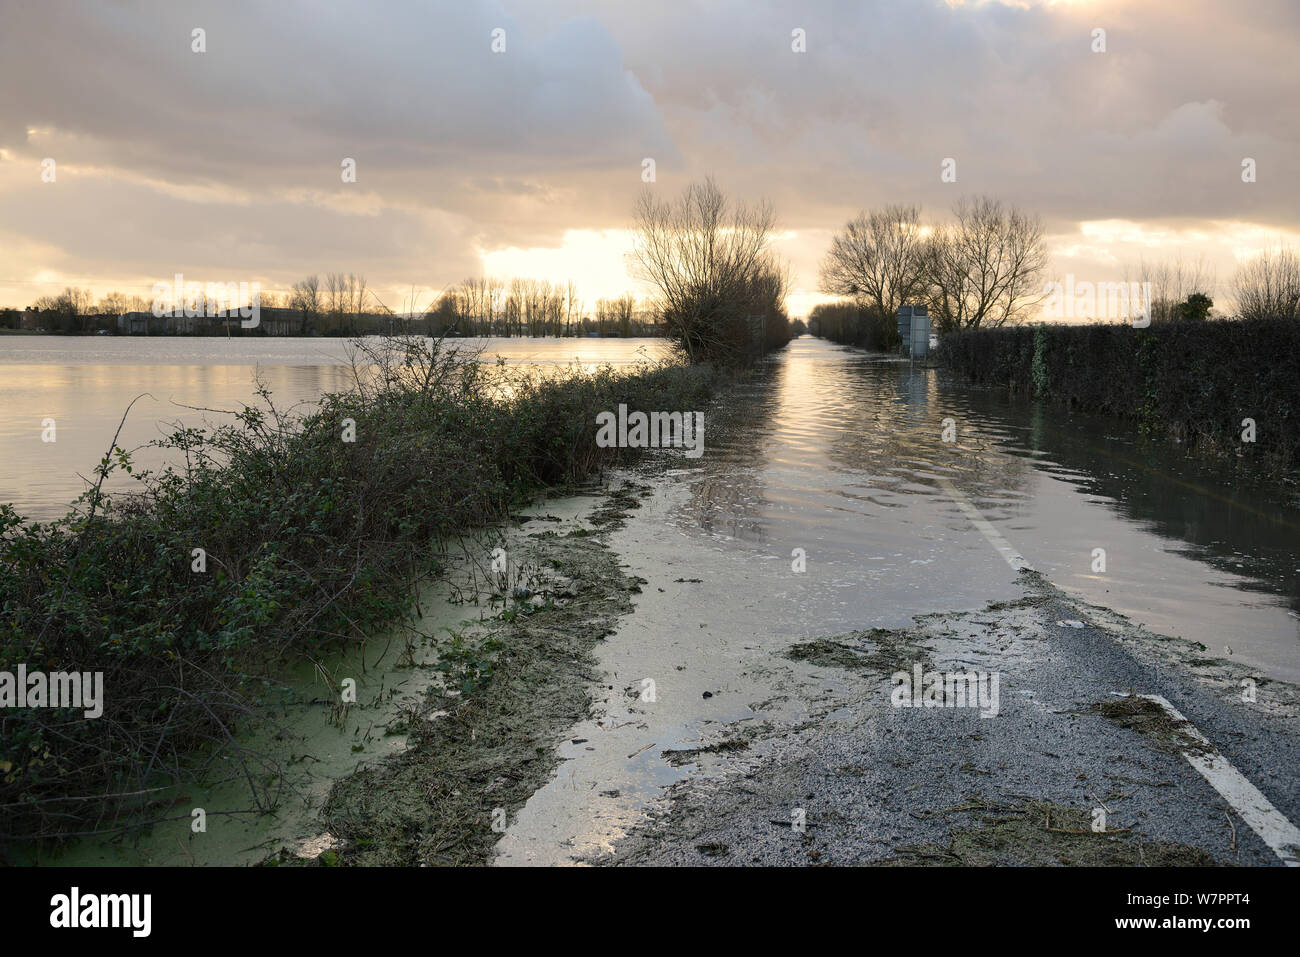 Severely flooded and closed A361 road at sunset between Burrowbridge and East Lyng across Southlake moor after weeks of heavy rain, Somerset Levels, UK, January 2013. Stock Photo